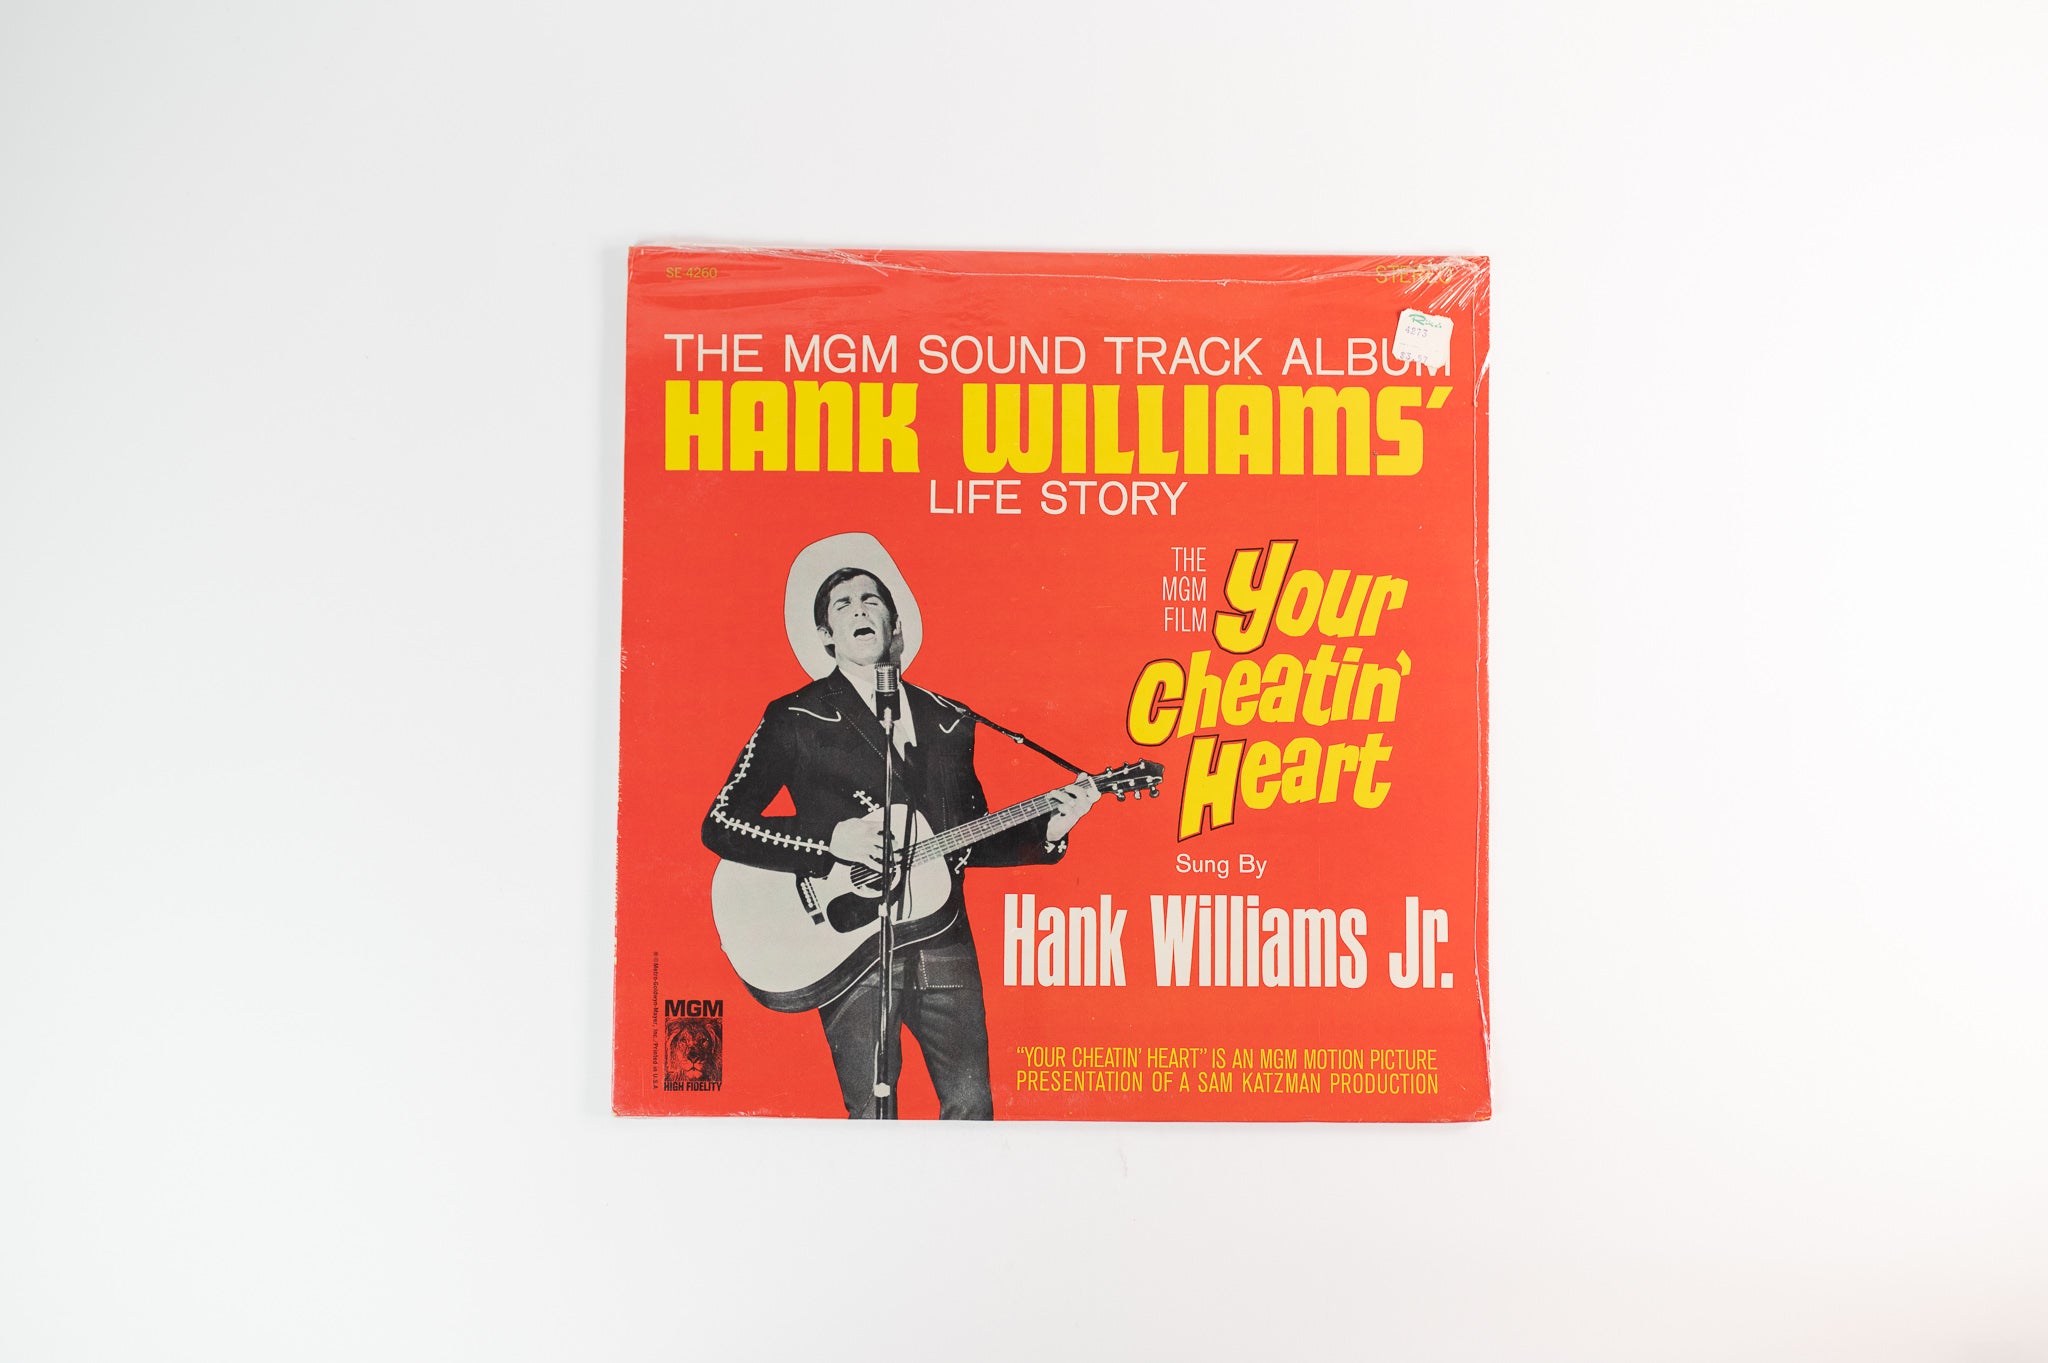 Hank Williams Jr. - Your Cheatin' Heart (Original Motion Picture Sound Track) on MGM Records